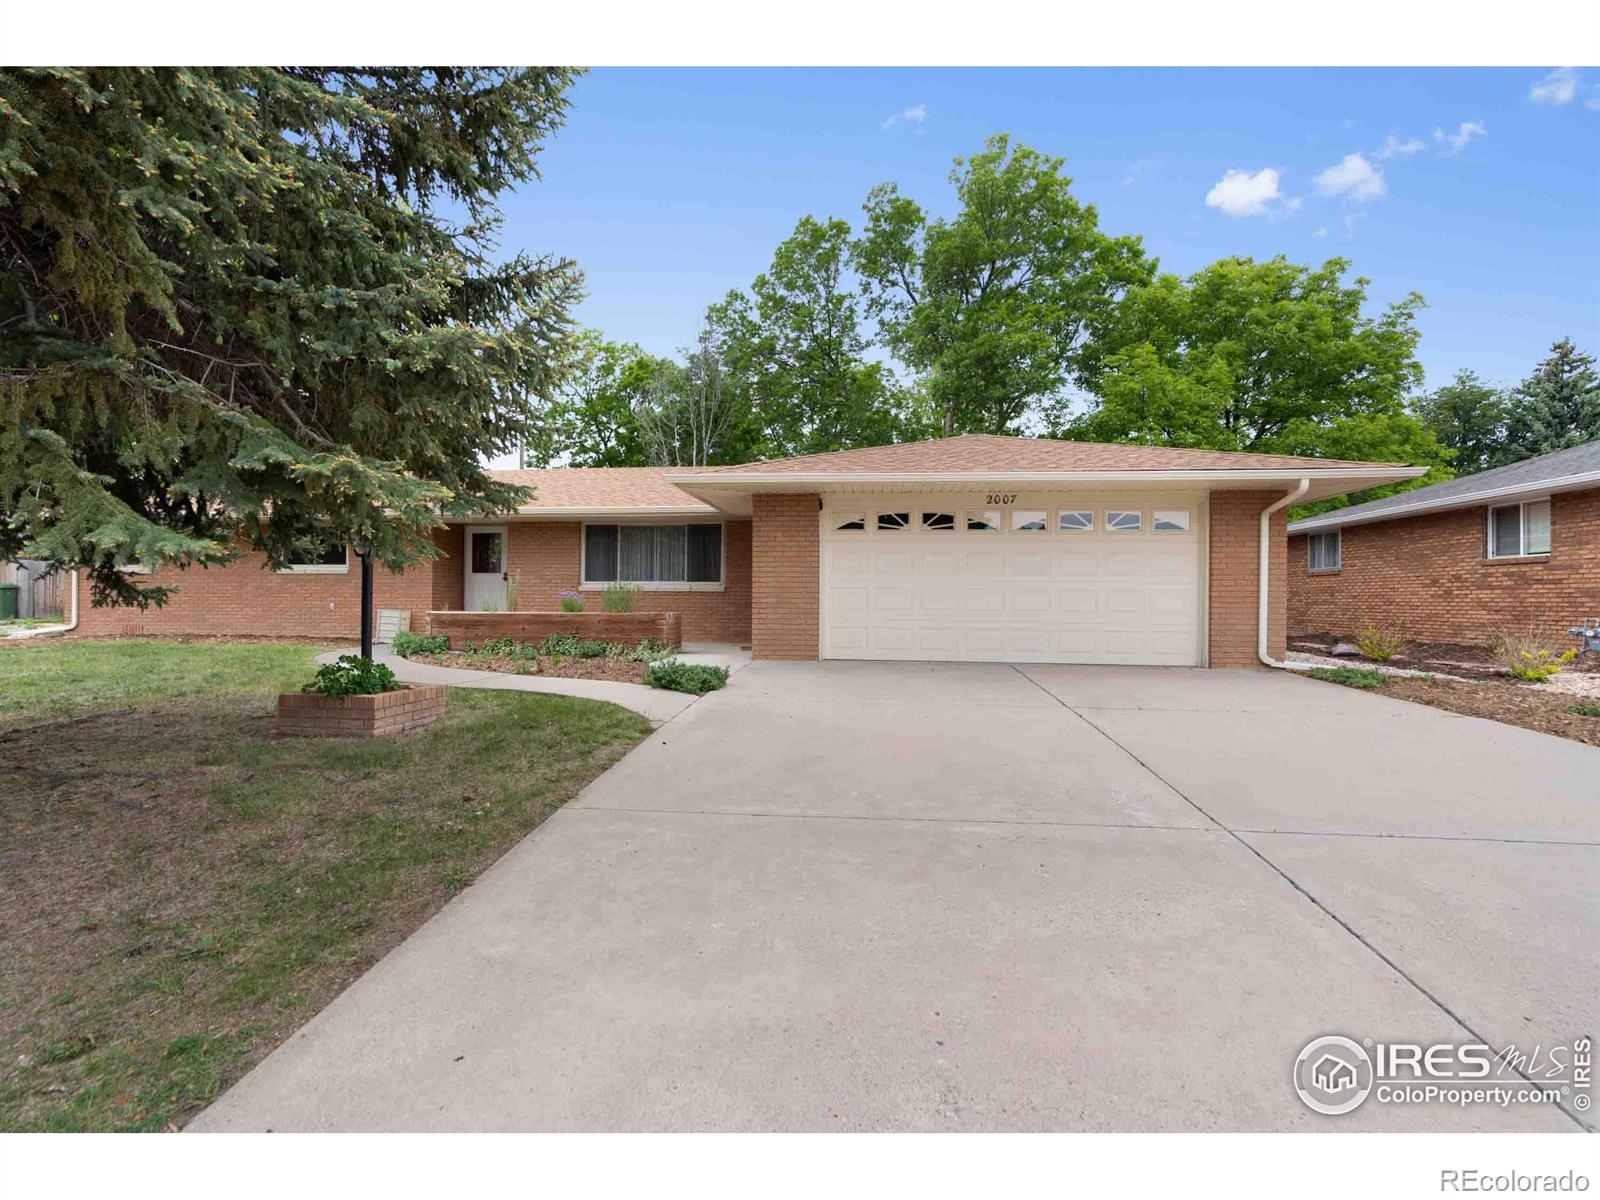 2007 n empire avenue, Loveland sold home. Closed on 2024-07-18 for $450,000.